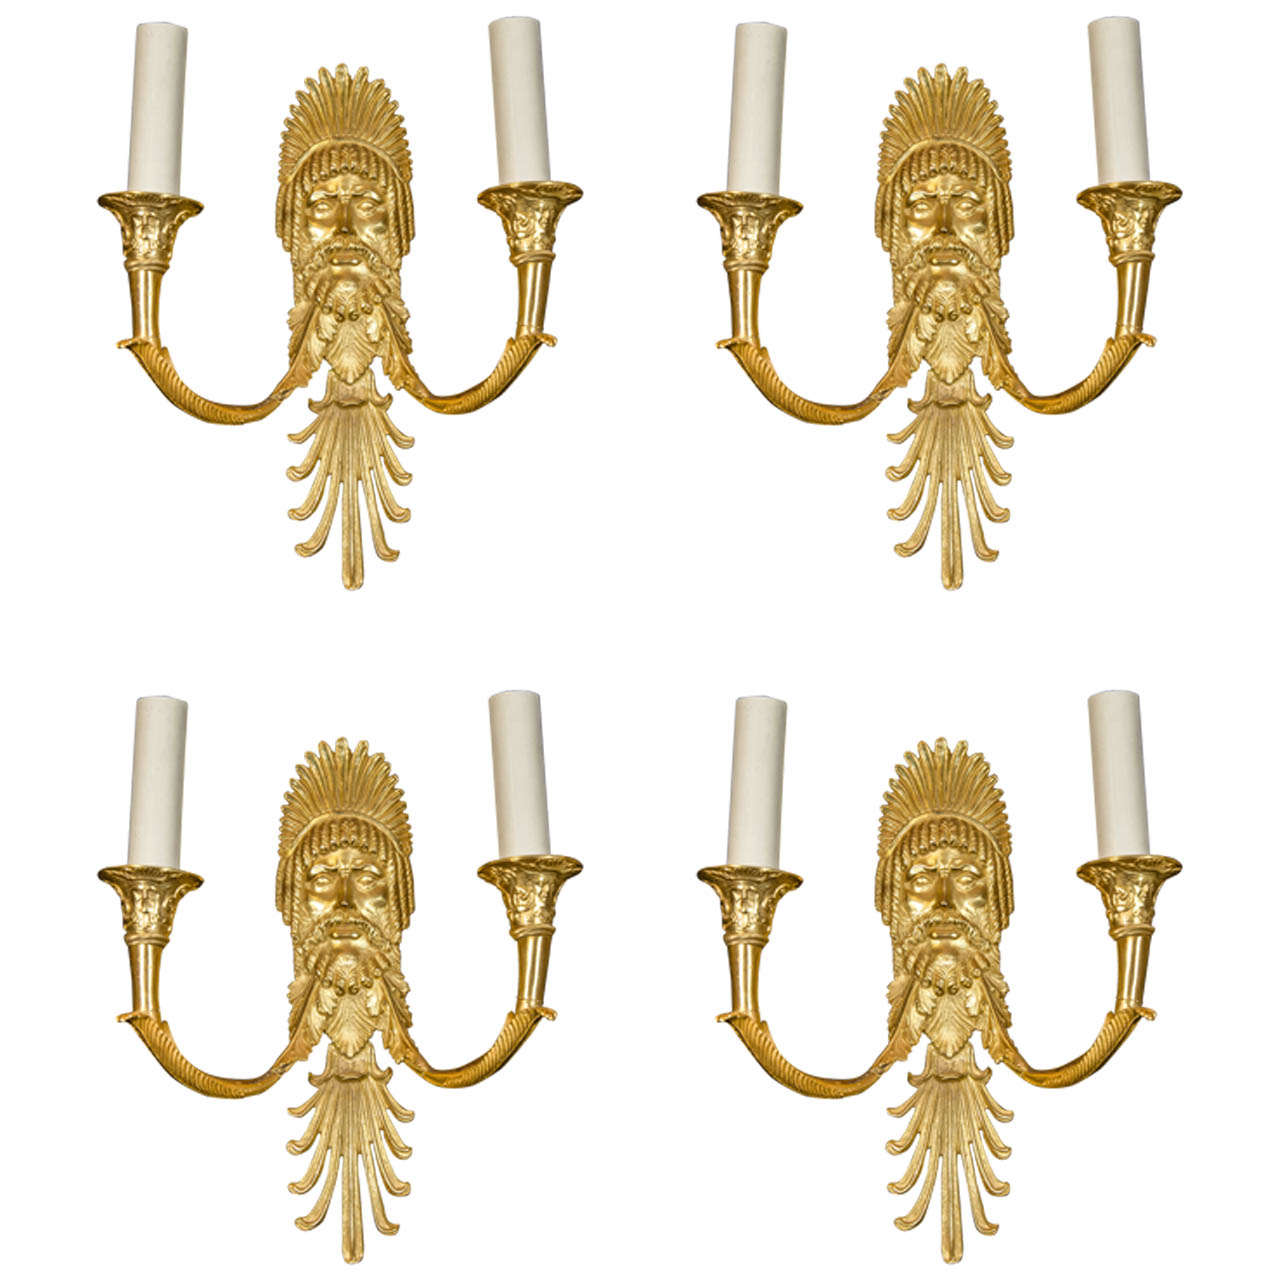 Set of Eight French Empire Style Gilt Bronze Figural Neoclassical Wall Sconces